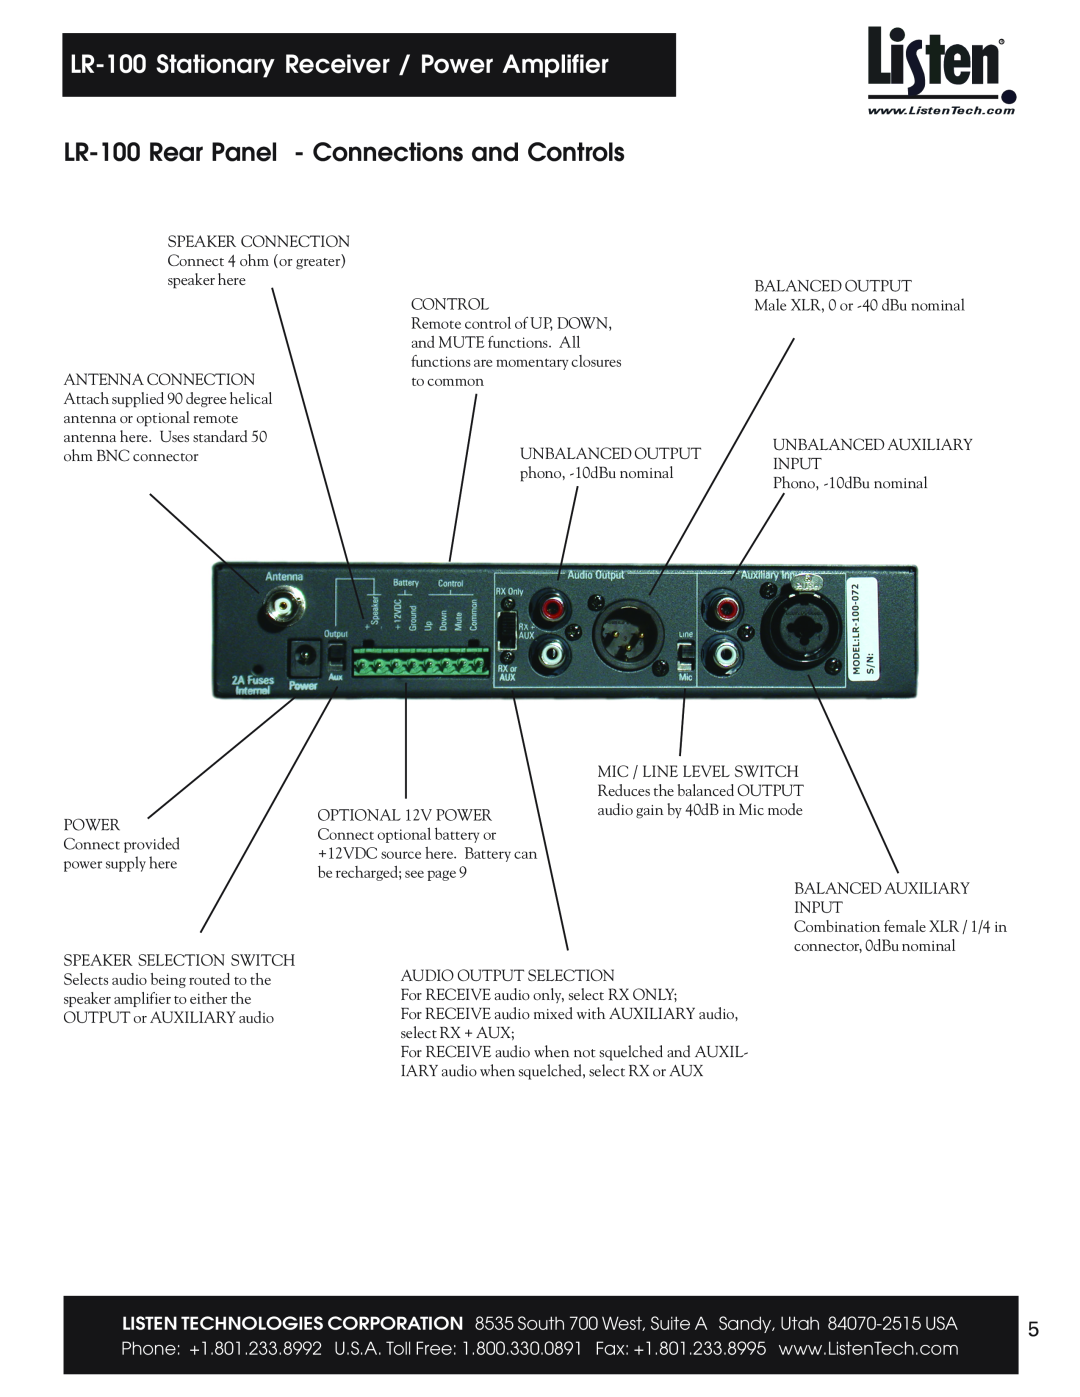 Listen Technologies user manual LR-100Rear Panel - Connections and Controls, LR-100Stationary Receiver / Power Amplifier 